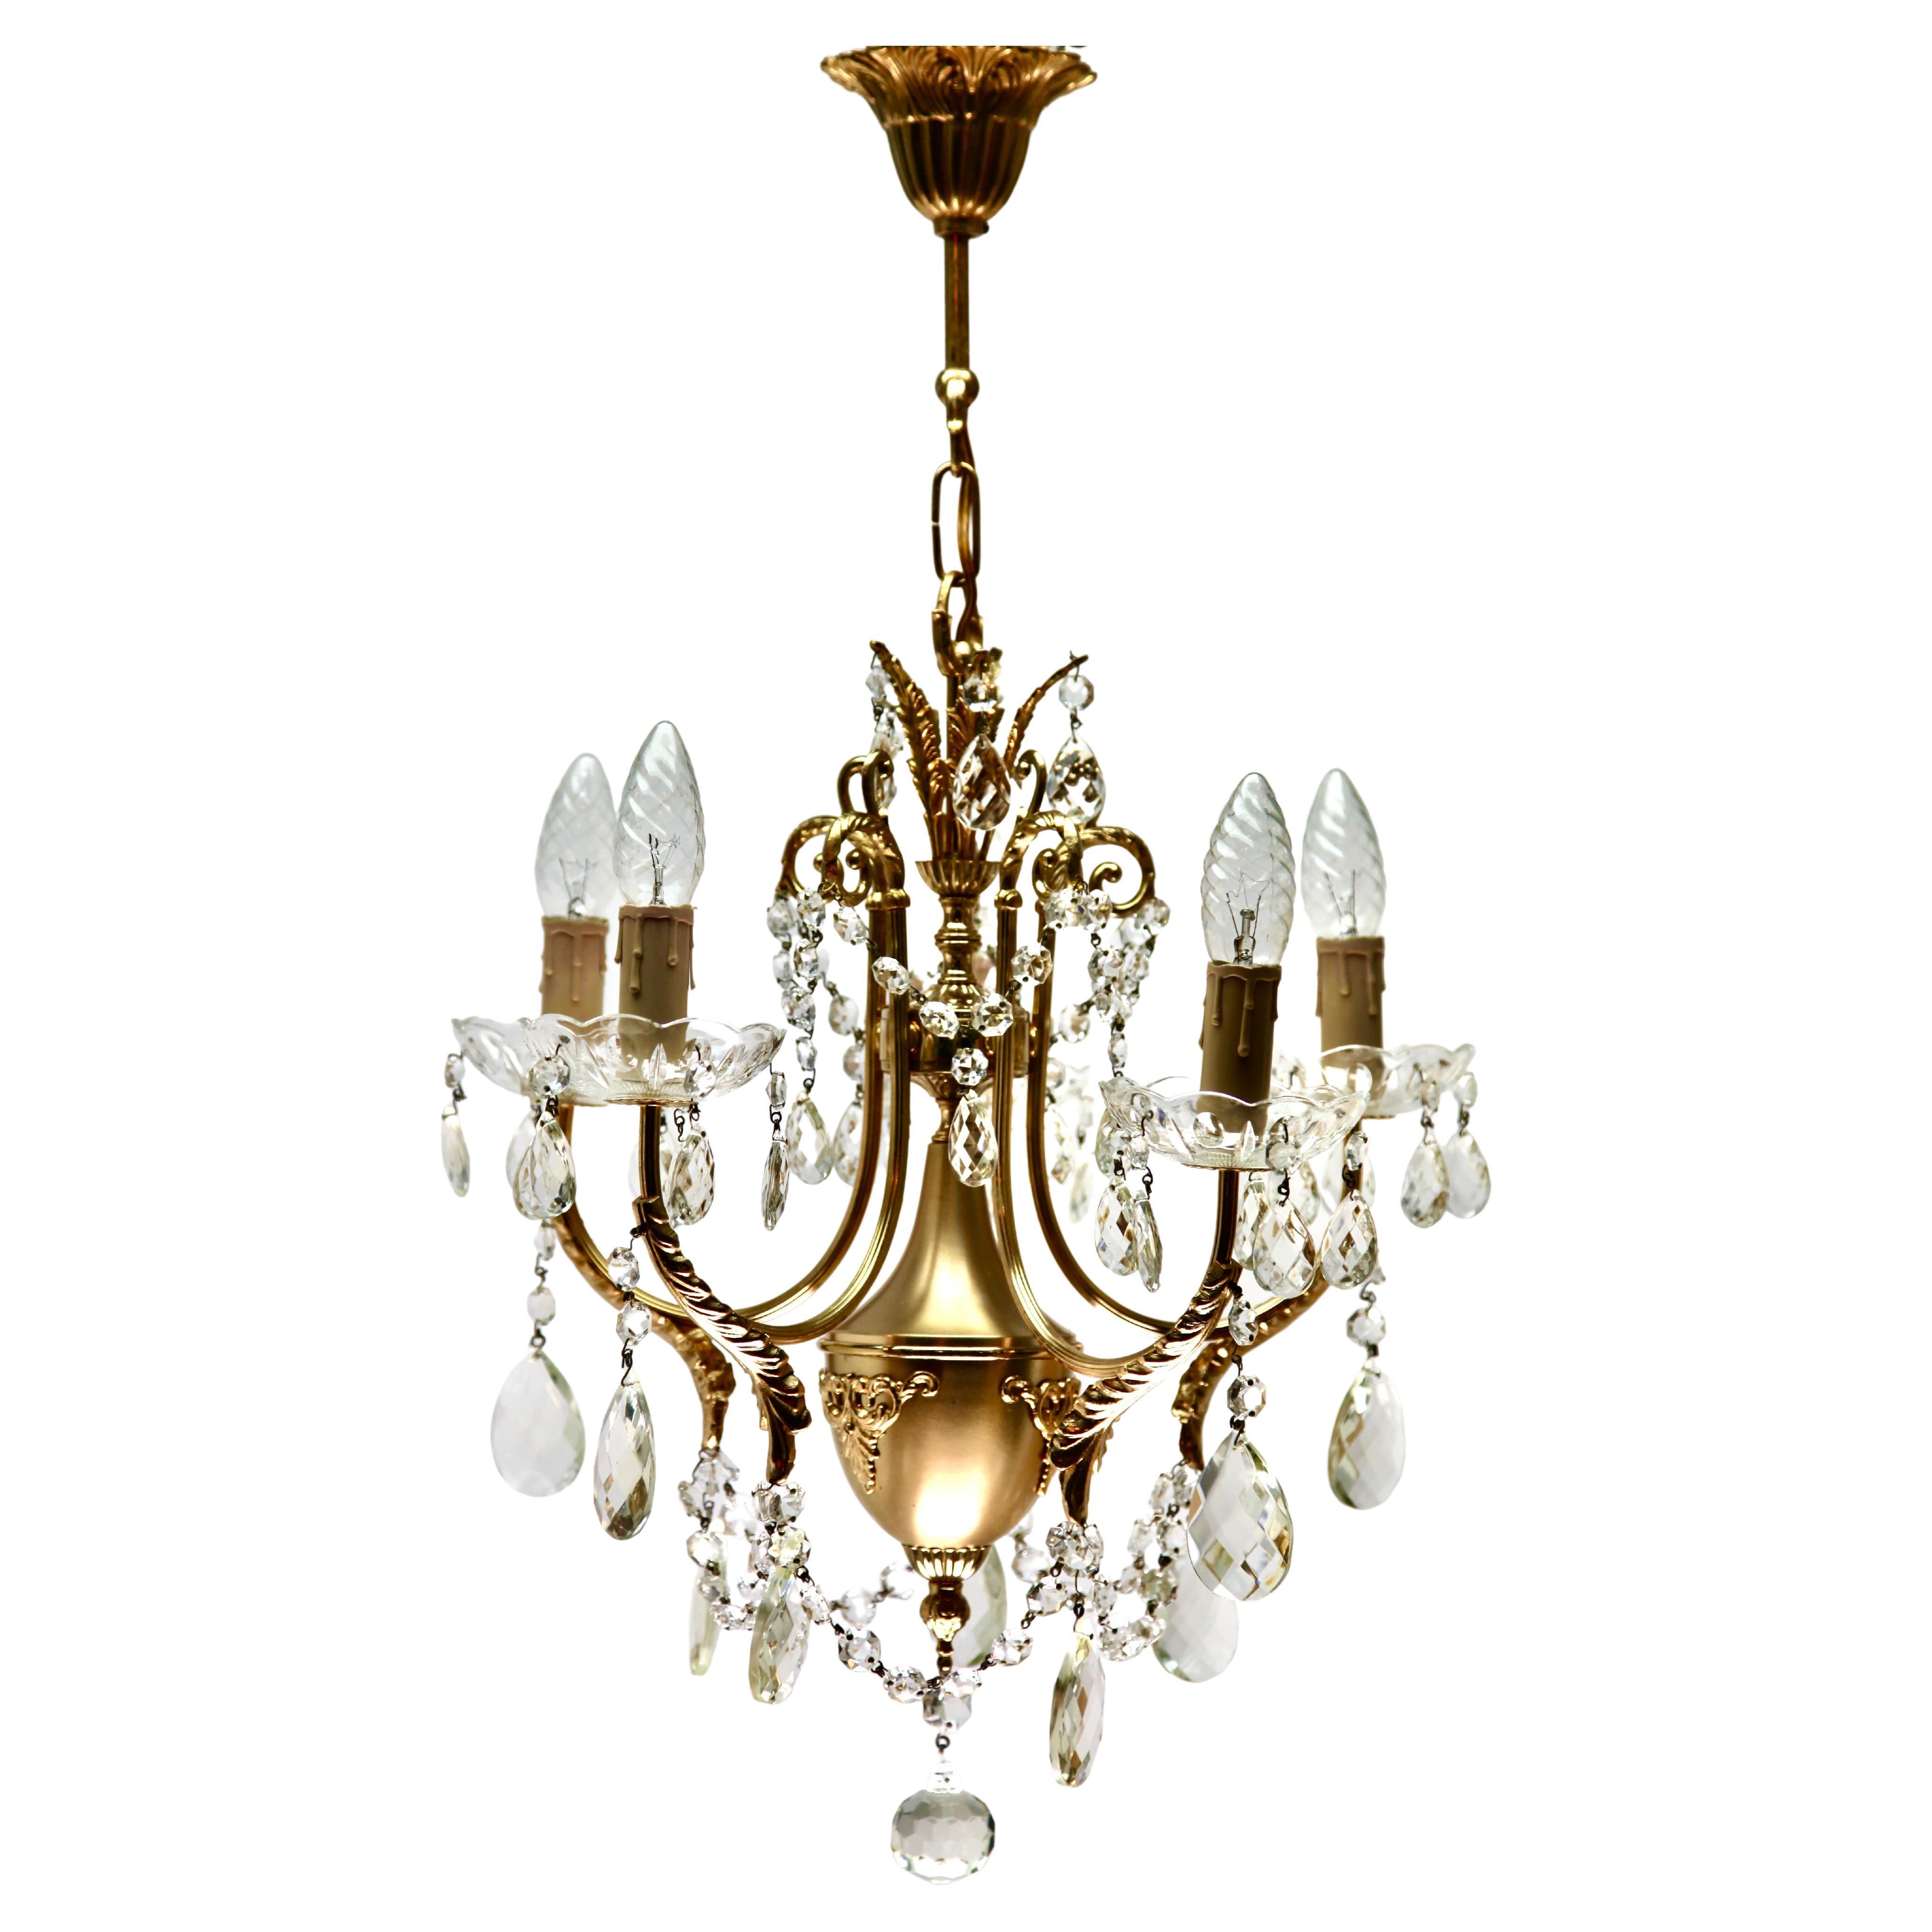 20th Century Italian rock crystal 5 arms chandelier

Photography fails to capture simple elegance.
 
In excellent condition and in full working order. 
And safe for usage in the World.



 